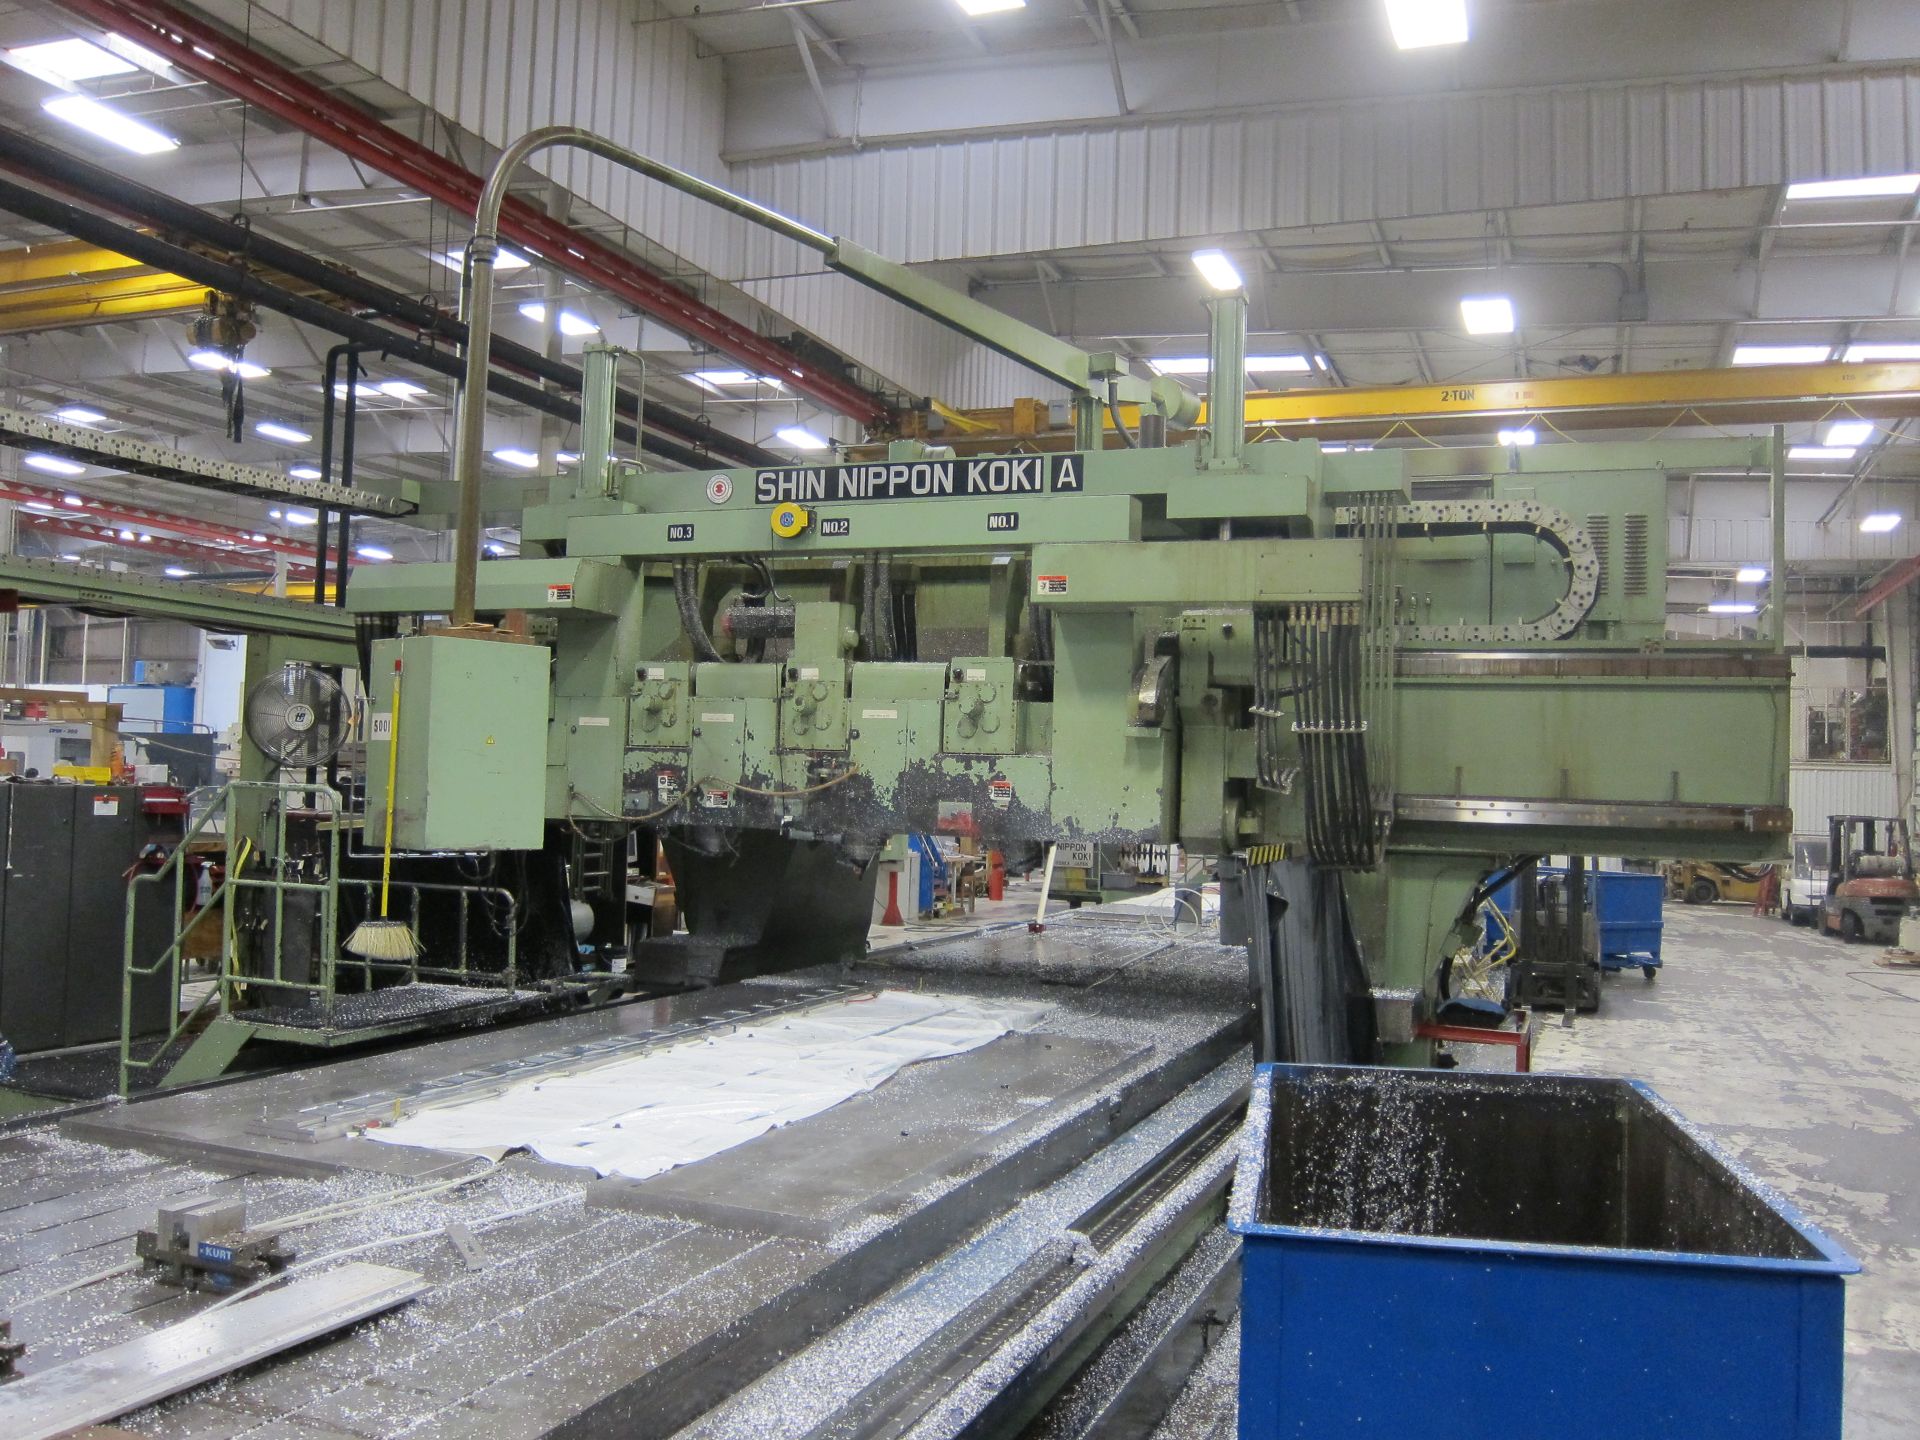 SNK PM-6 5-Axis CNC Gantry Type Profile Milling Machine - 1st Gantry Only - Image 3 of 7